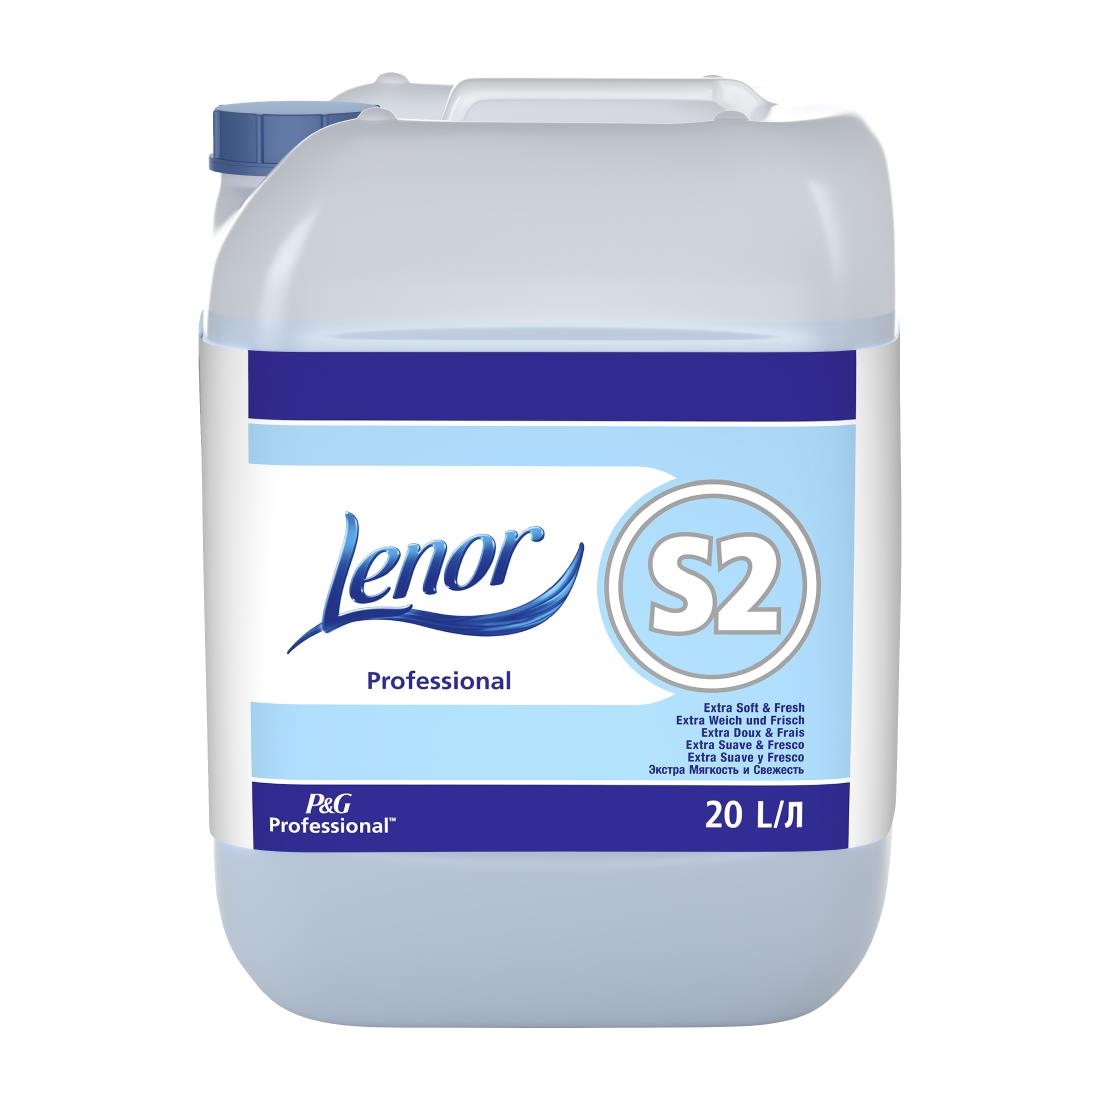 Lenor Professional S2 Extra Soft and Fresh Fabric Conditioner 20Ltr (DX540)